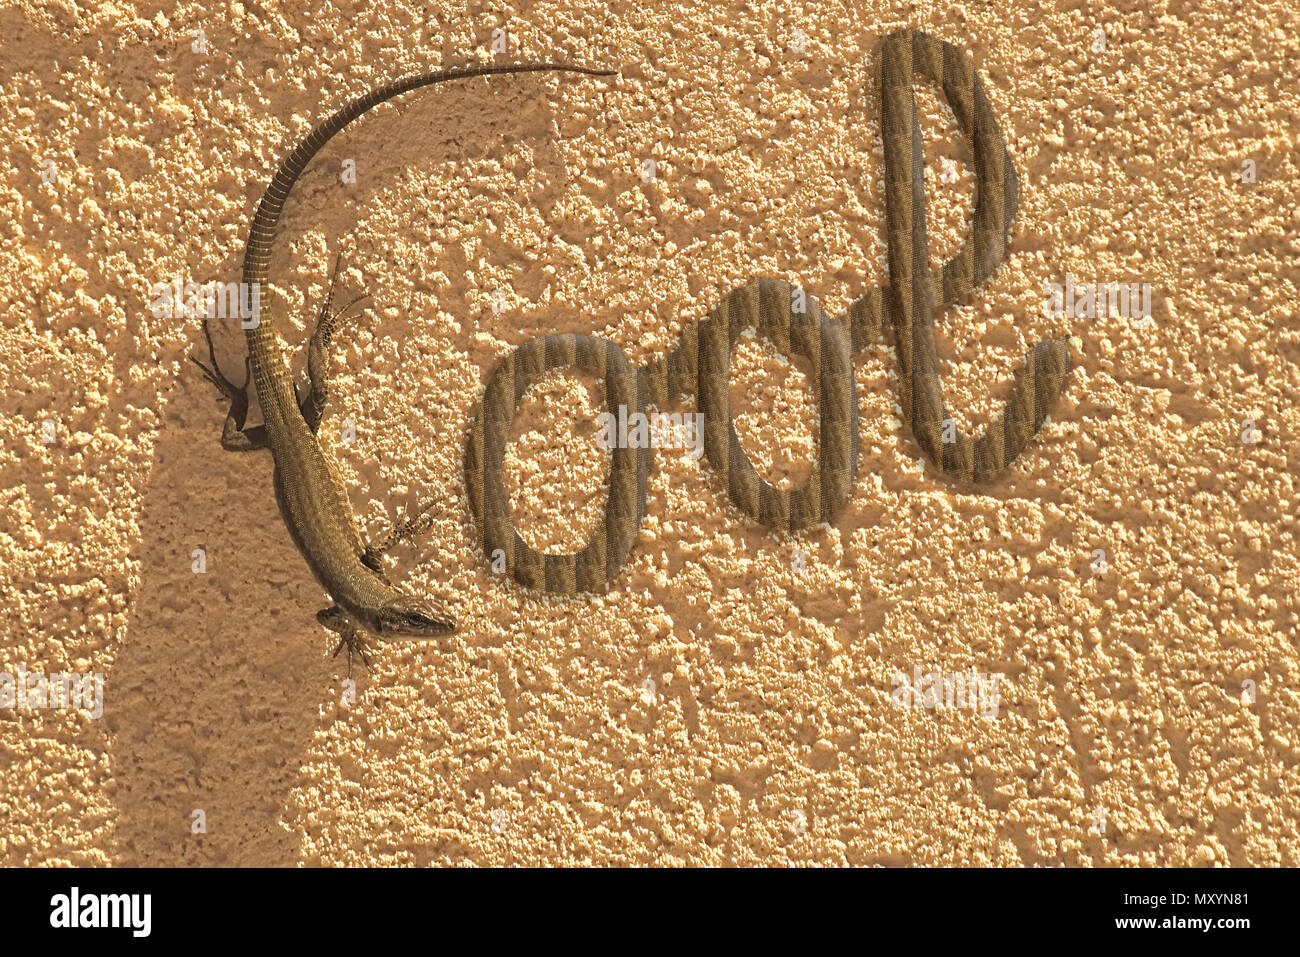 3D illustration of a lizard drawing the C letter of the word cool. Stock Photo